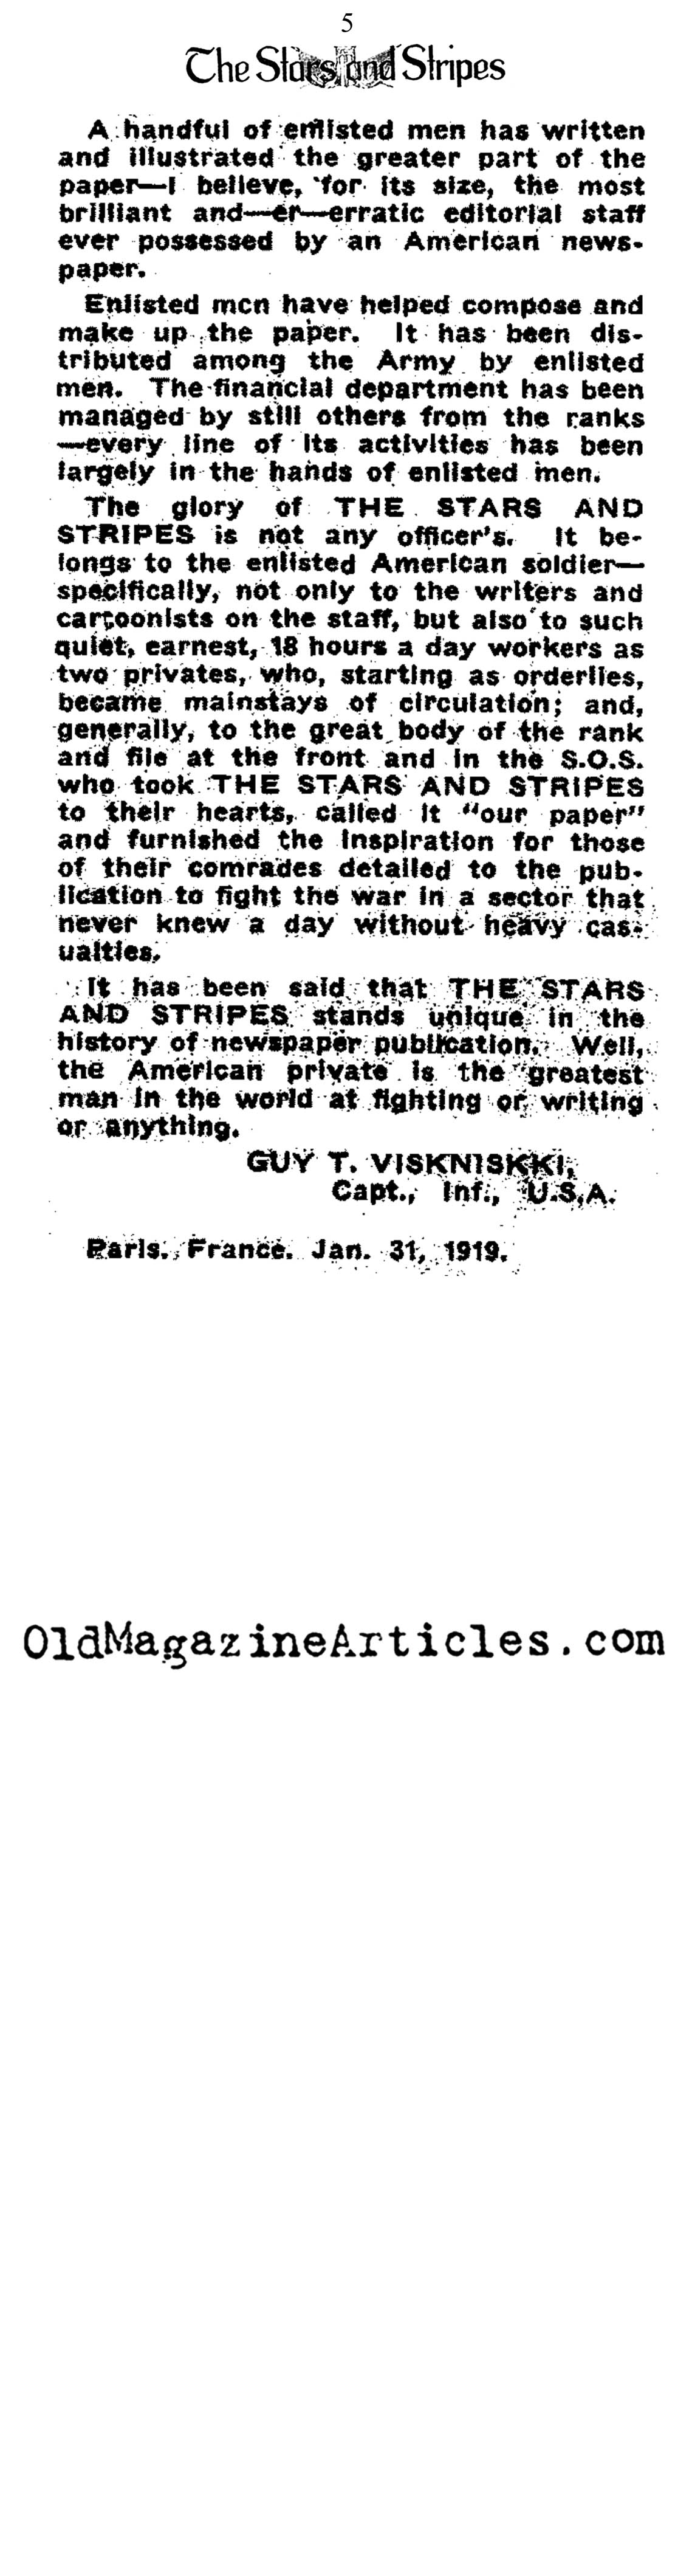 How the 'Stars & Stripes' Operated (The Stars and Stripes, 1919)